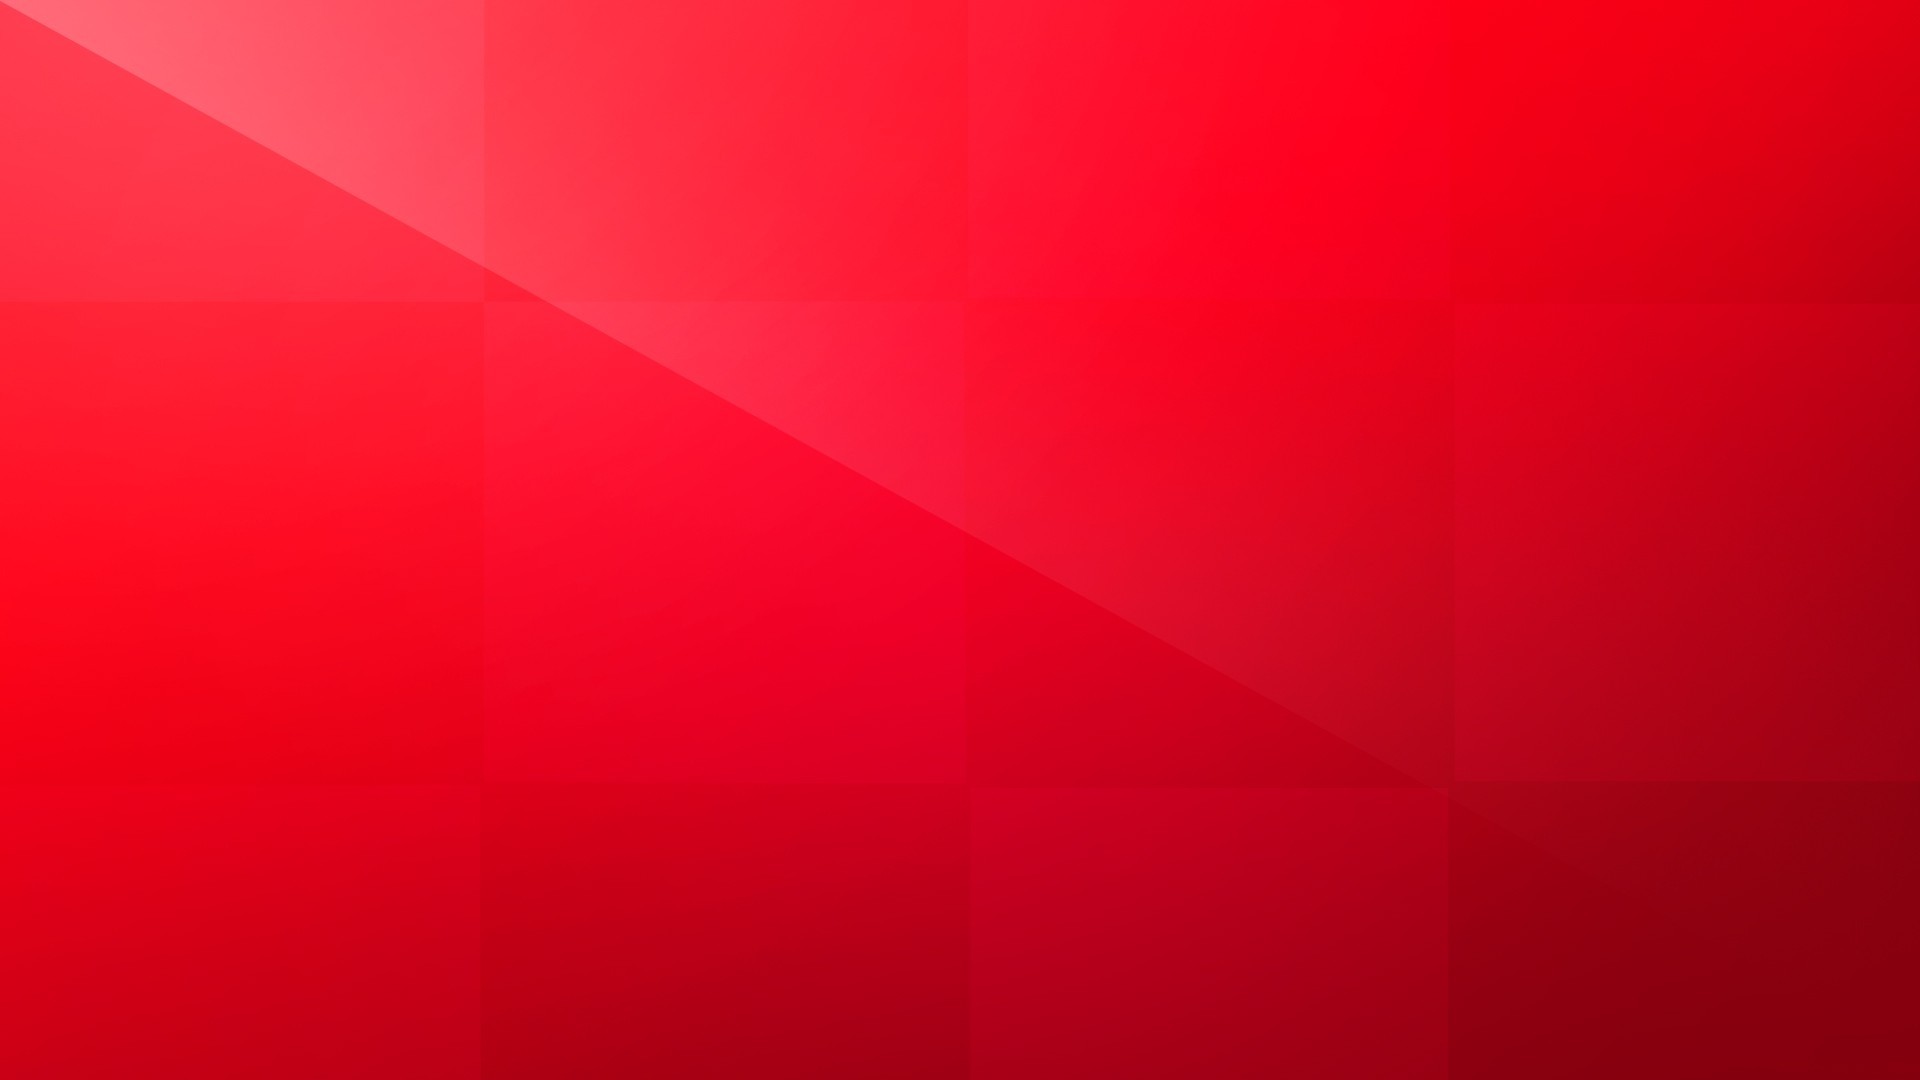 Backgrounds for red plain color backgrounds www 8backgrounds com